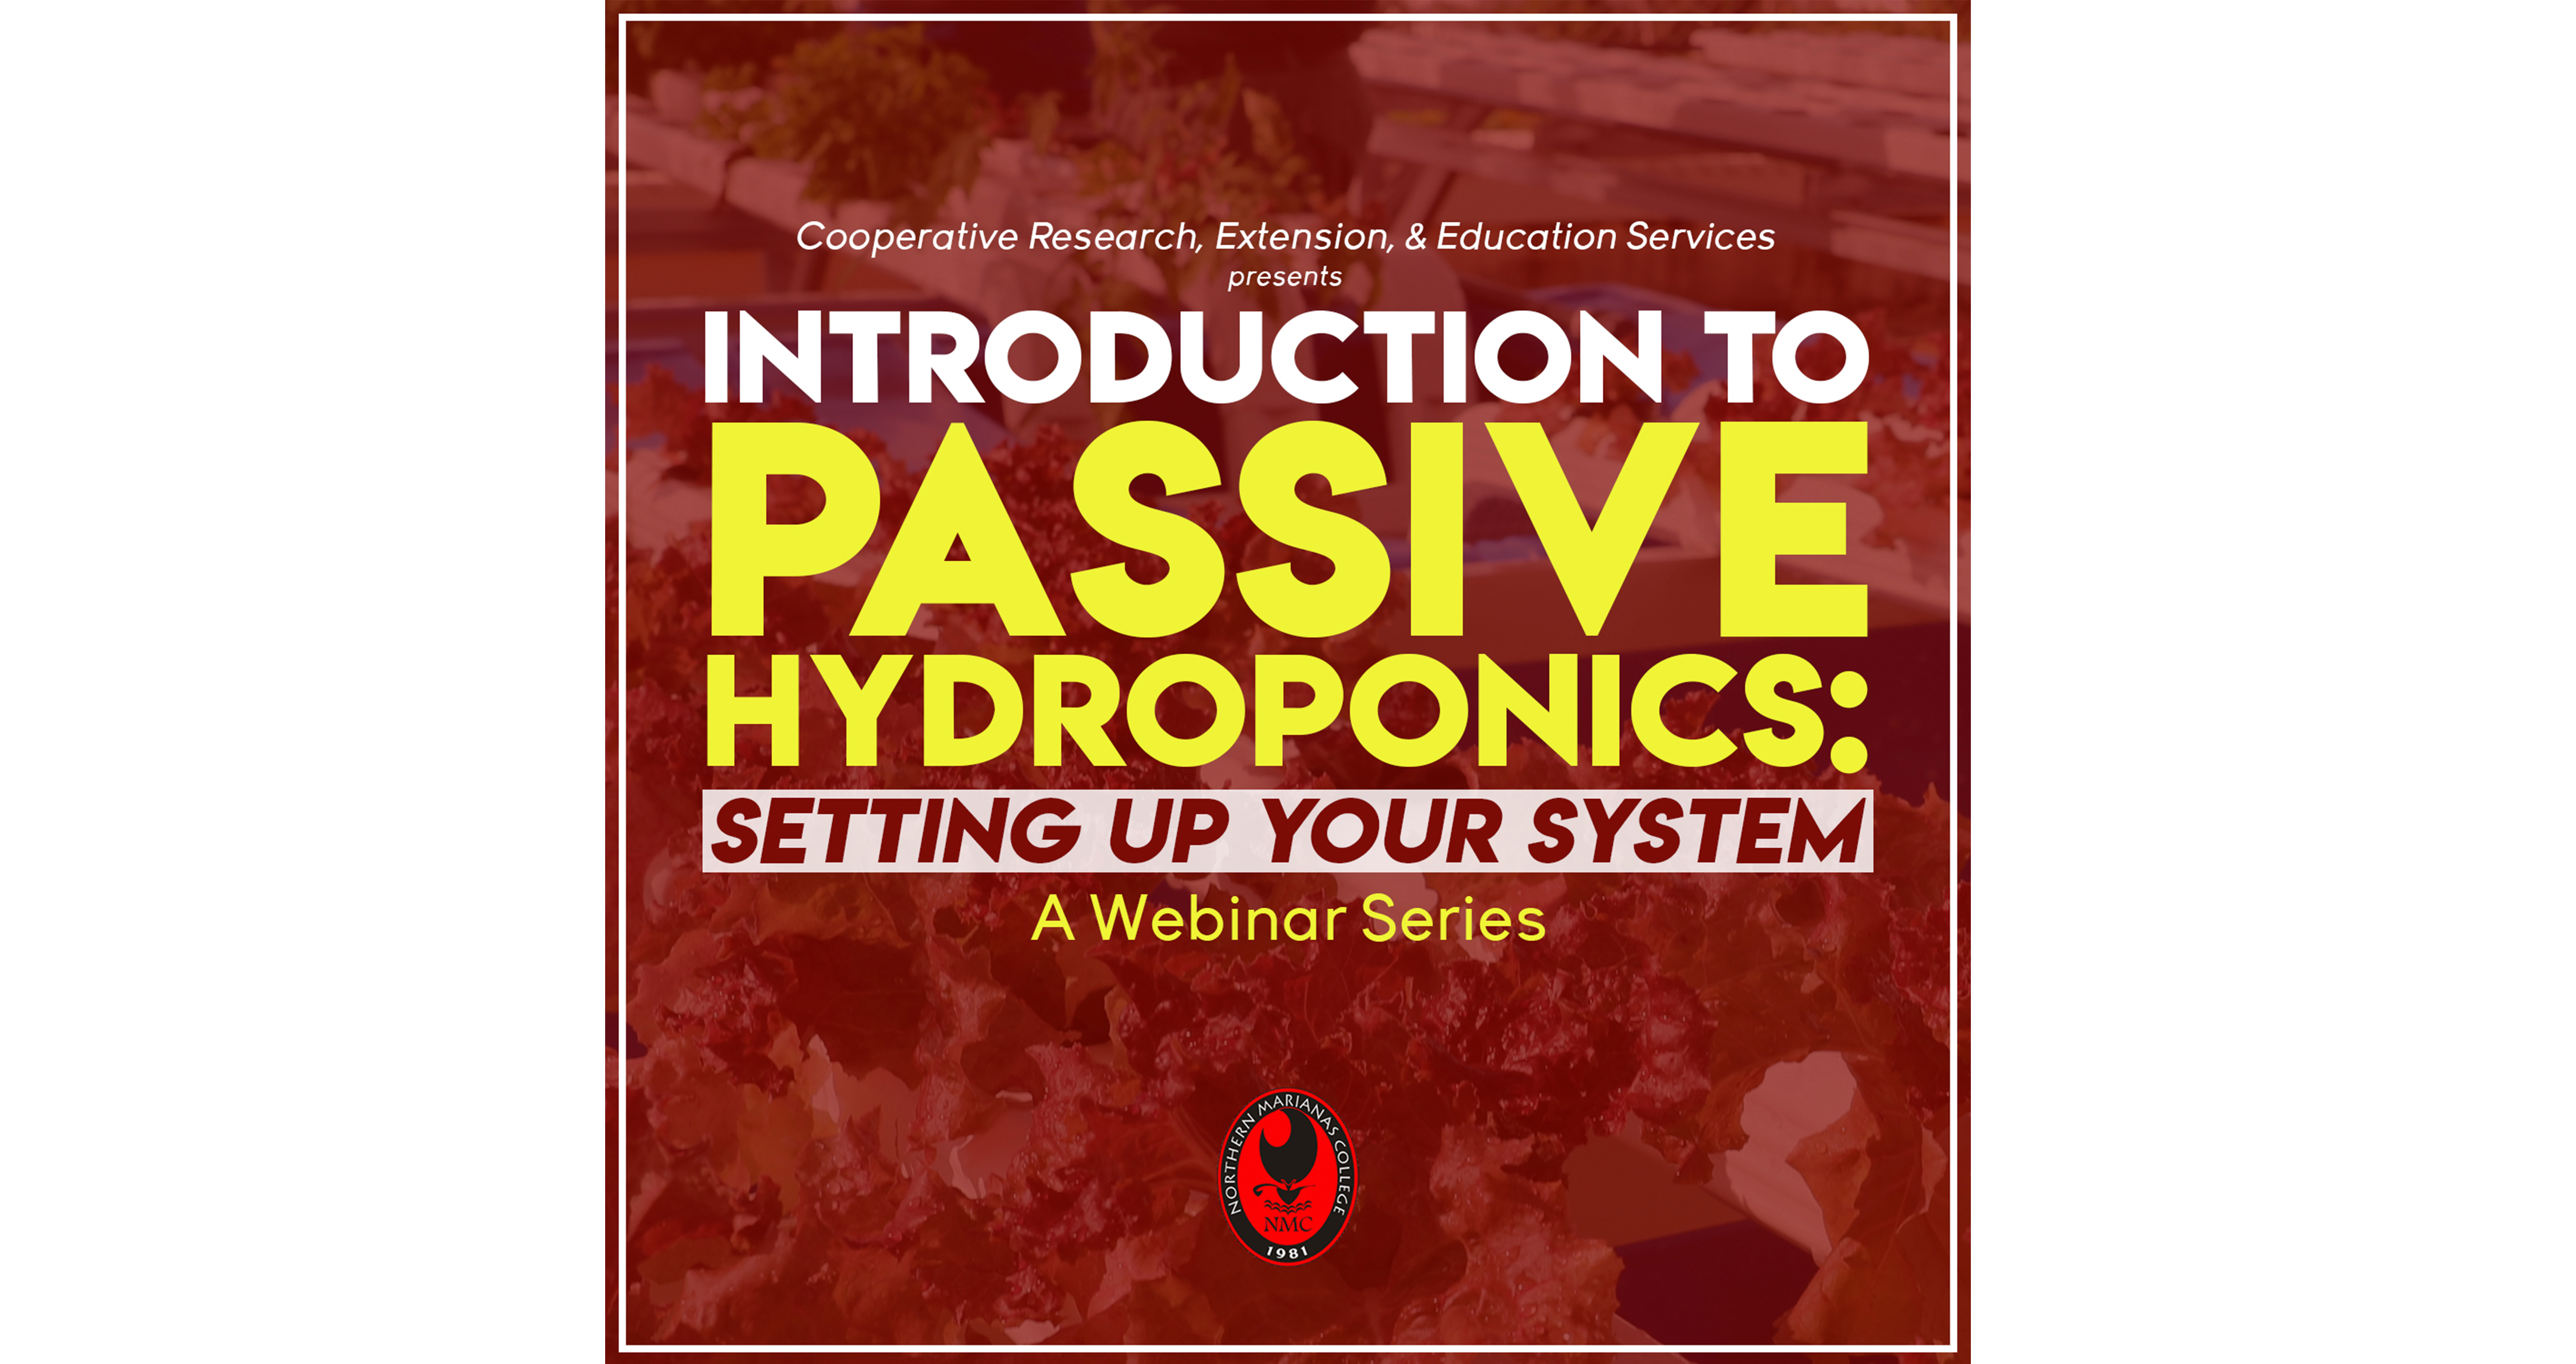 Introduction to Passive Hydroponics: Setting up your System